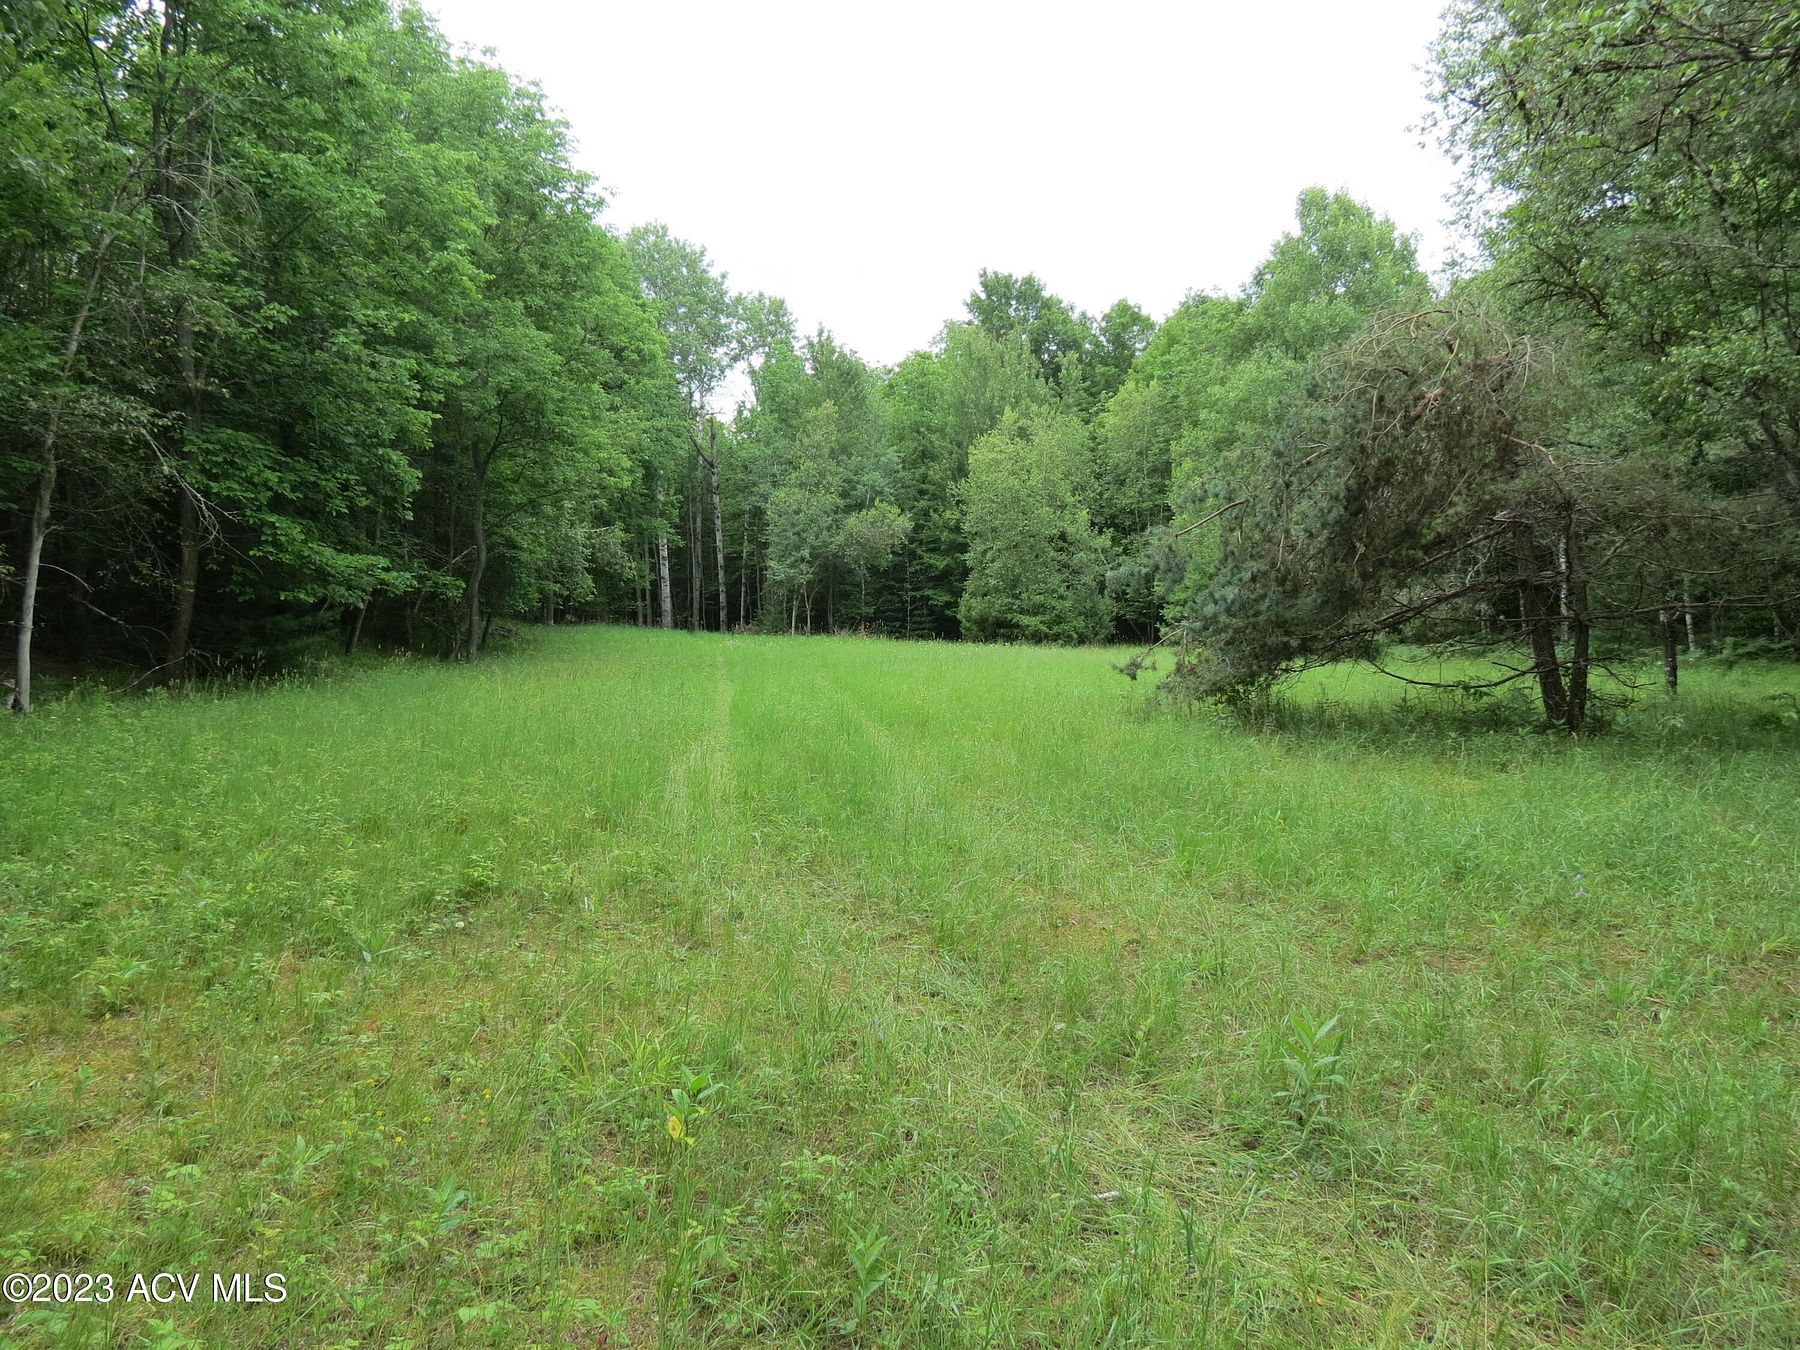 68.8 Acres of Land for Sale in Peru, New York